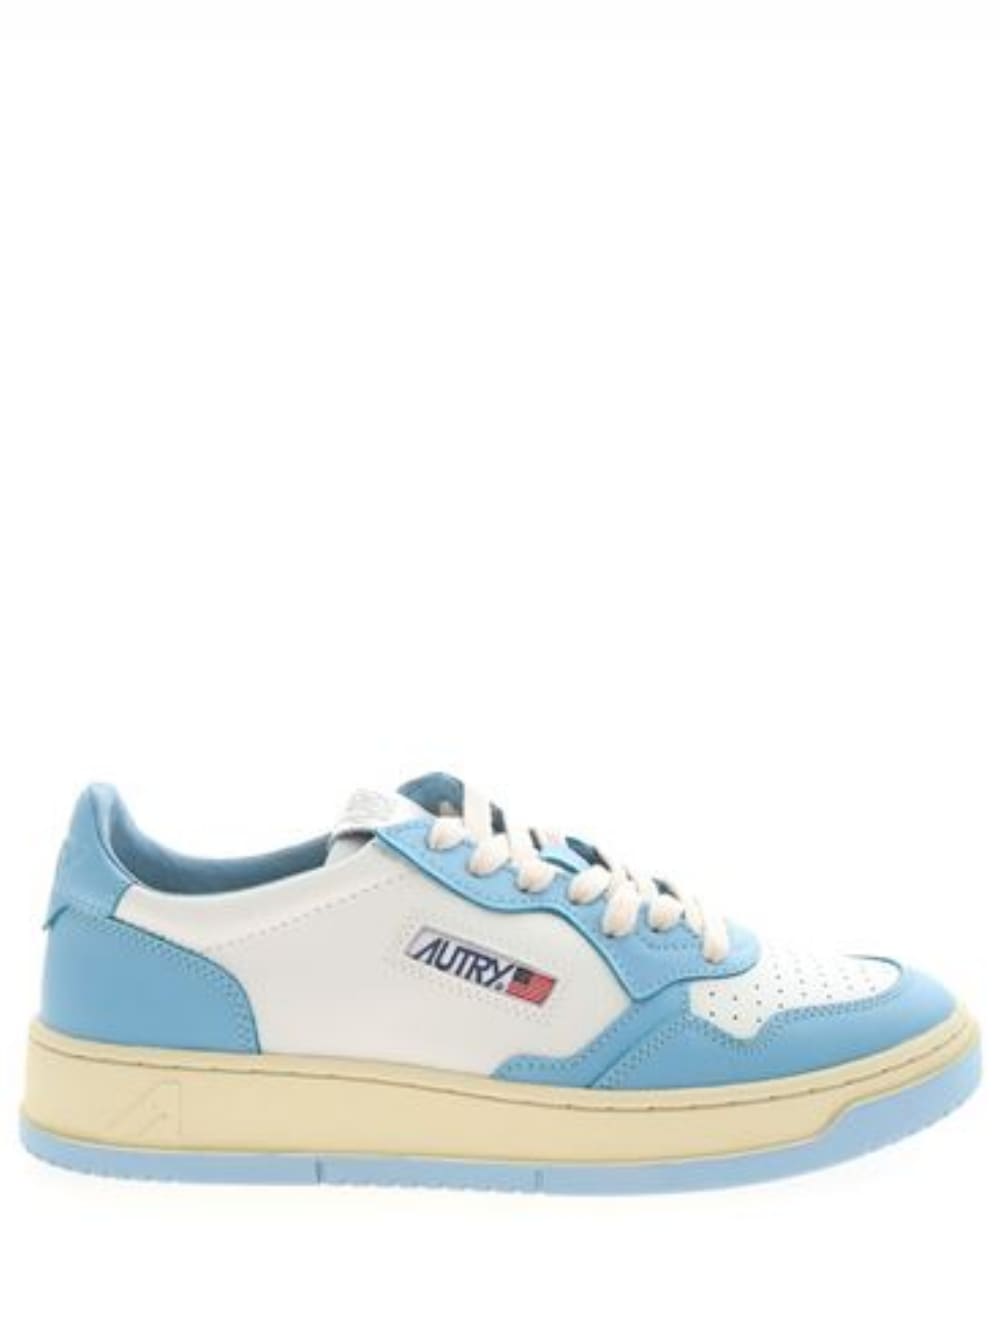 Autry White And Baby Bluelow Leather Sneakers